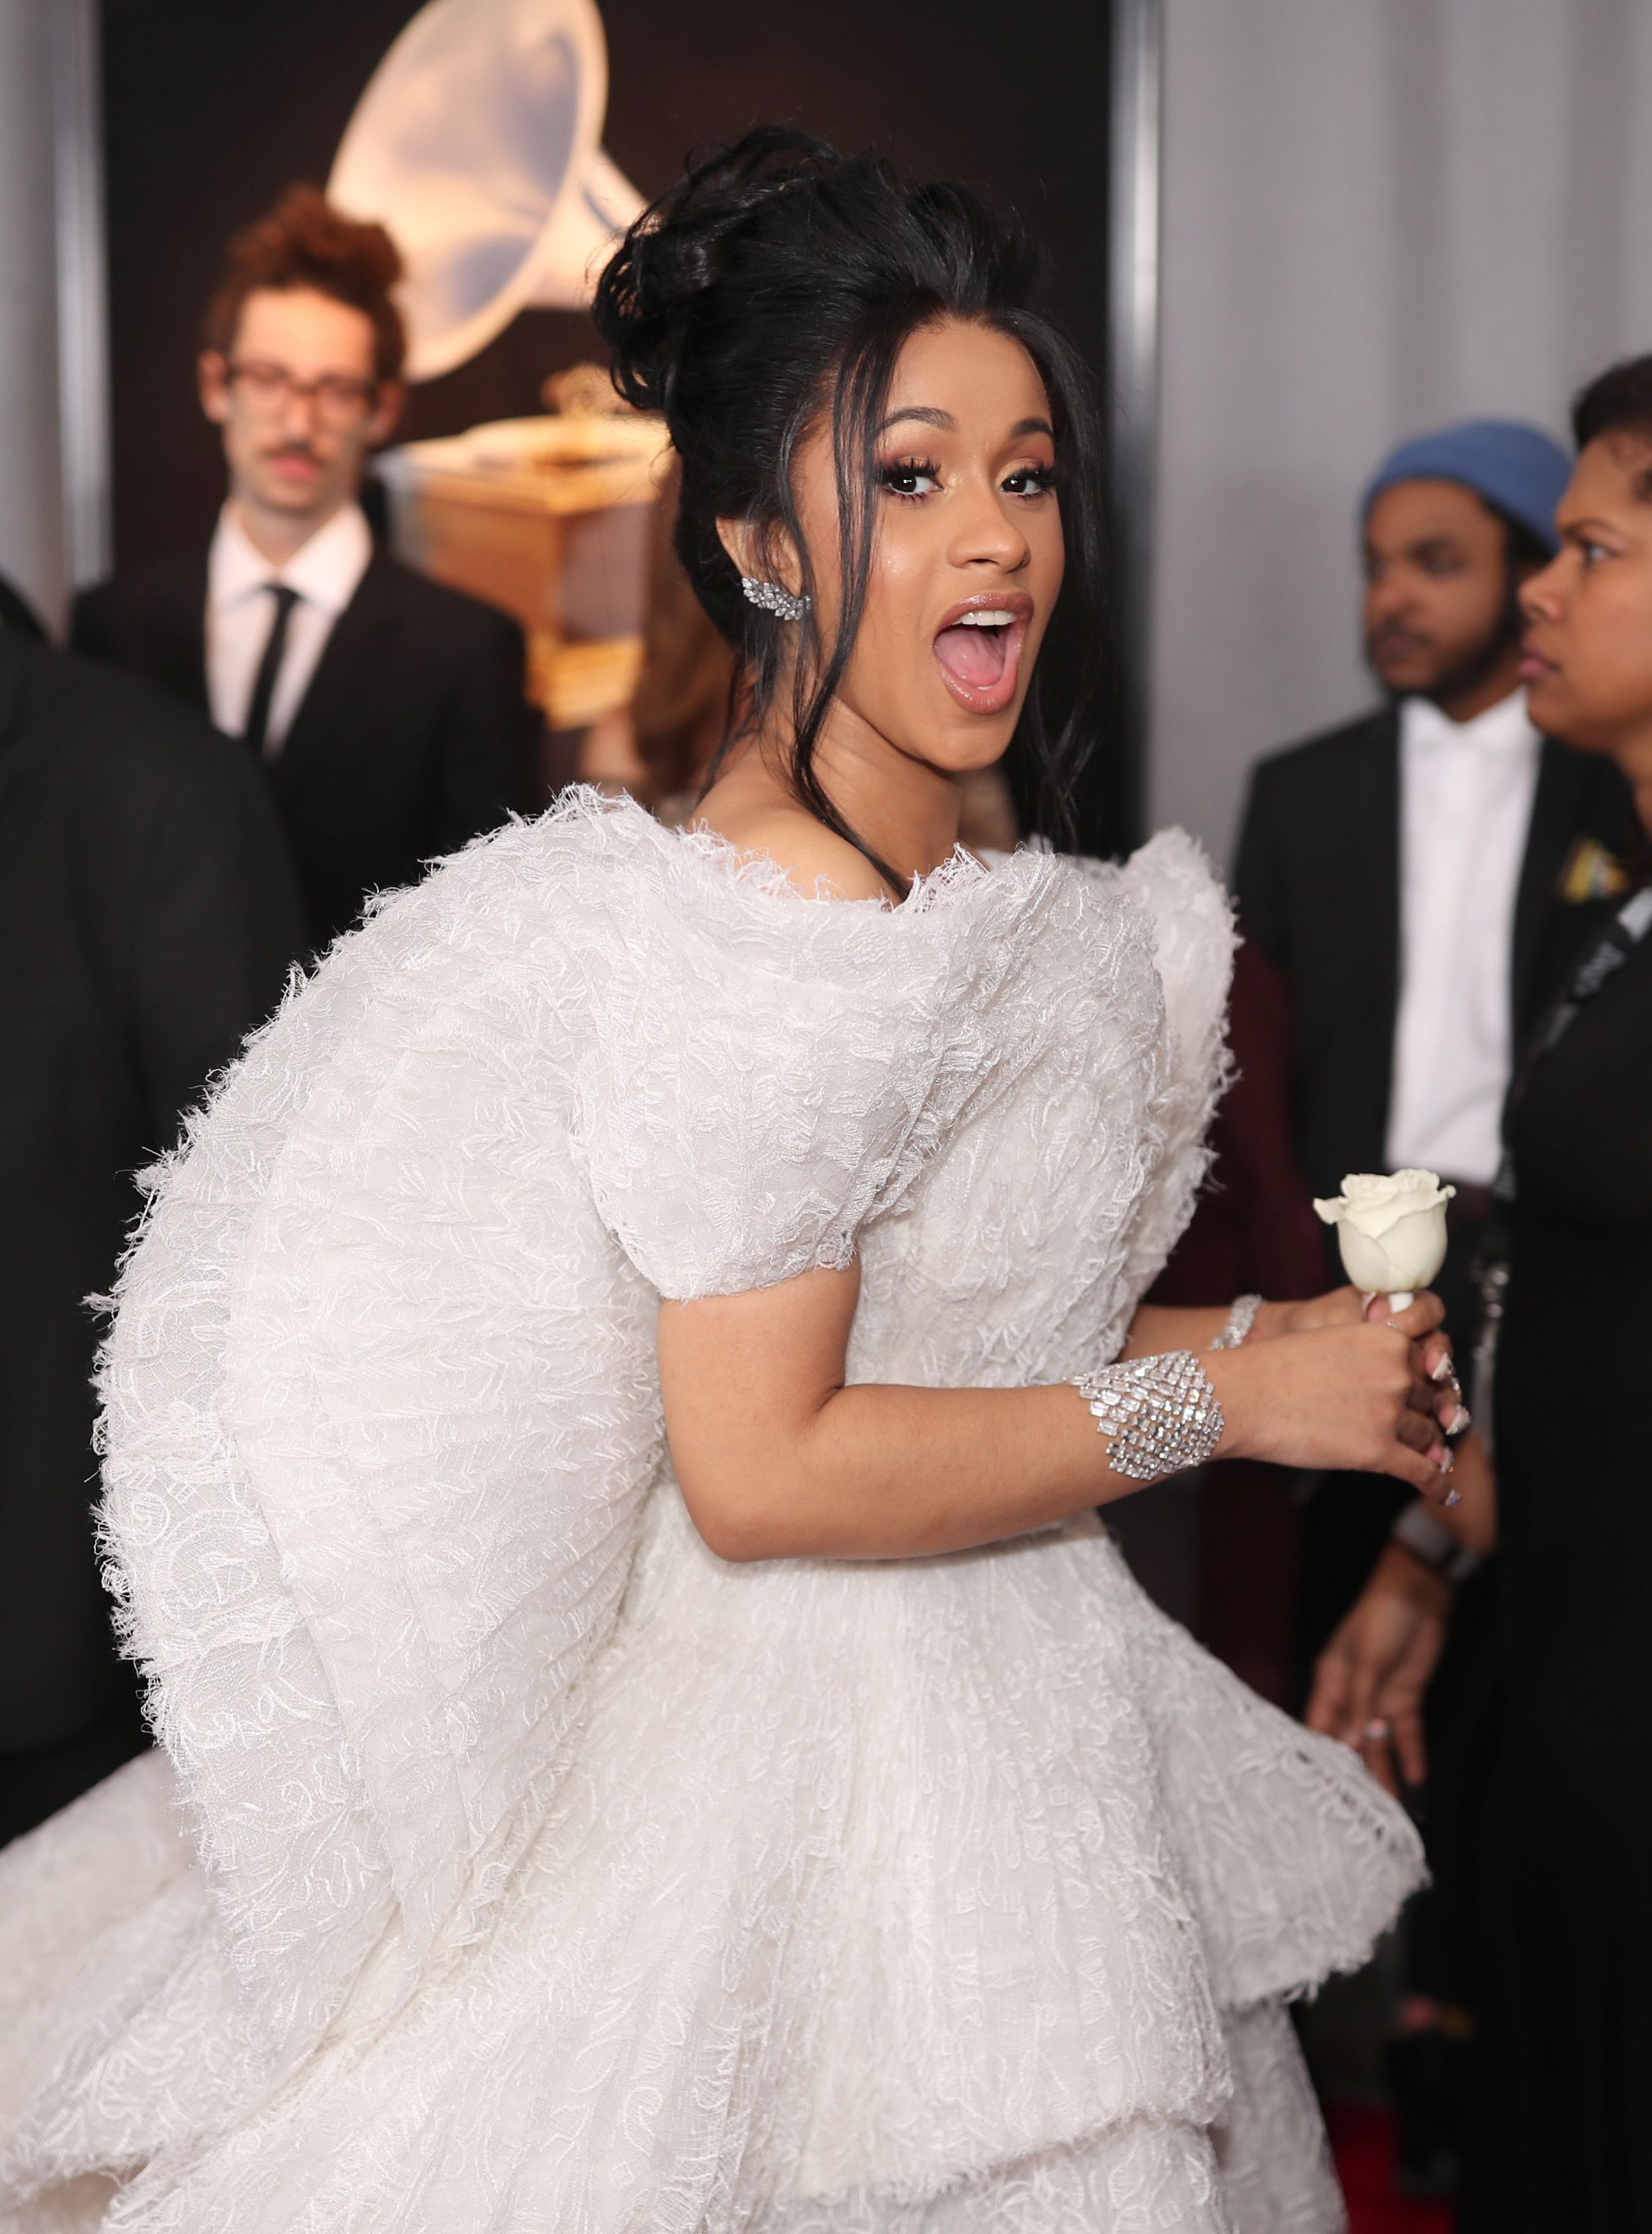 Cardi B during the 60th Annual GRAMMY Awards at Madison Square Garden on January 28, 2018 in New York City. | Source: Getty Images